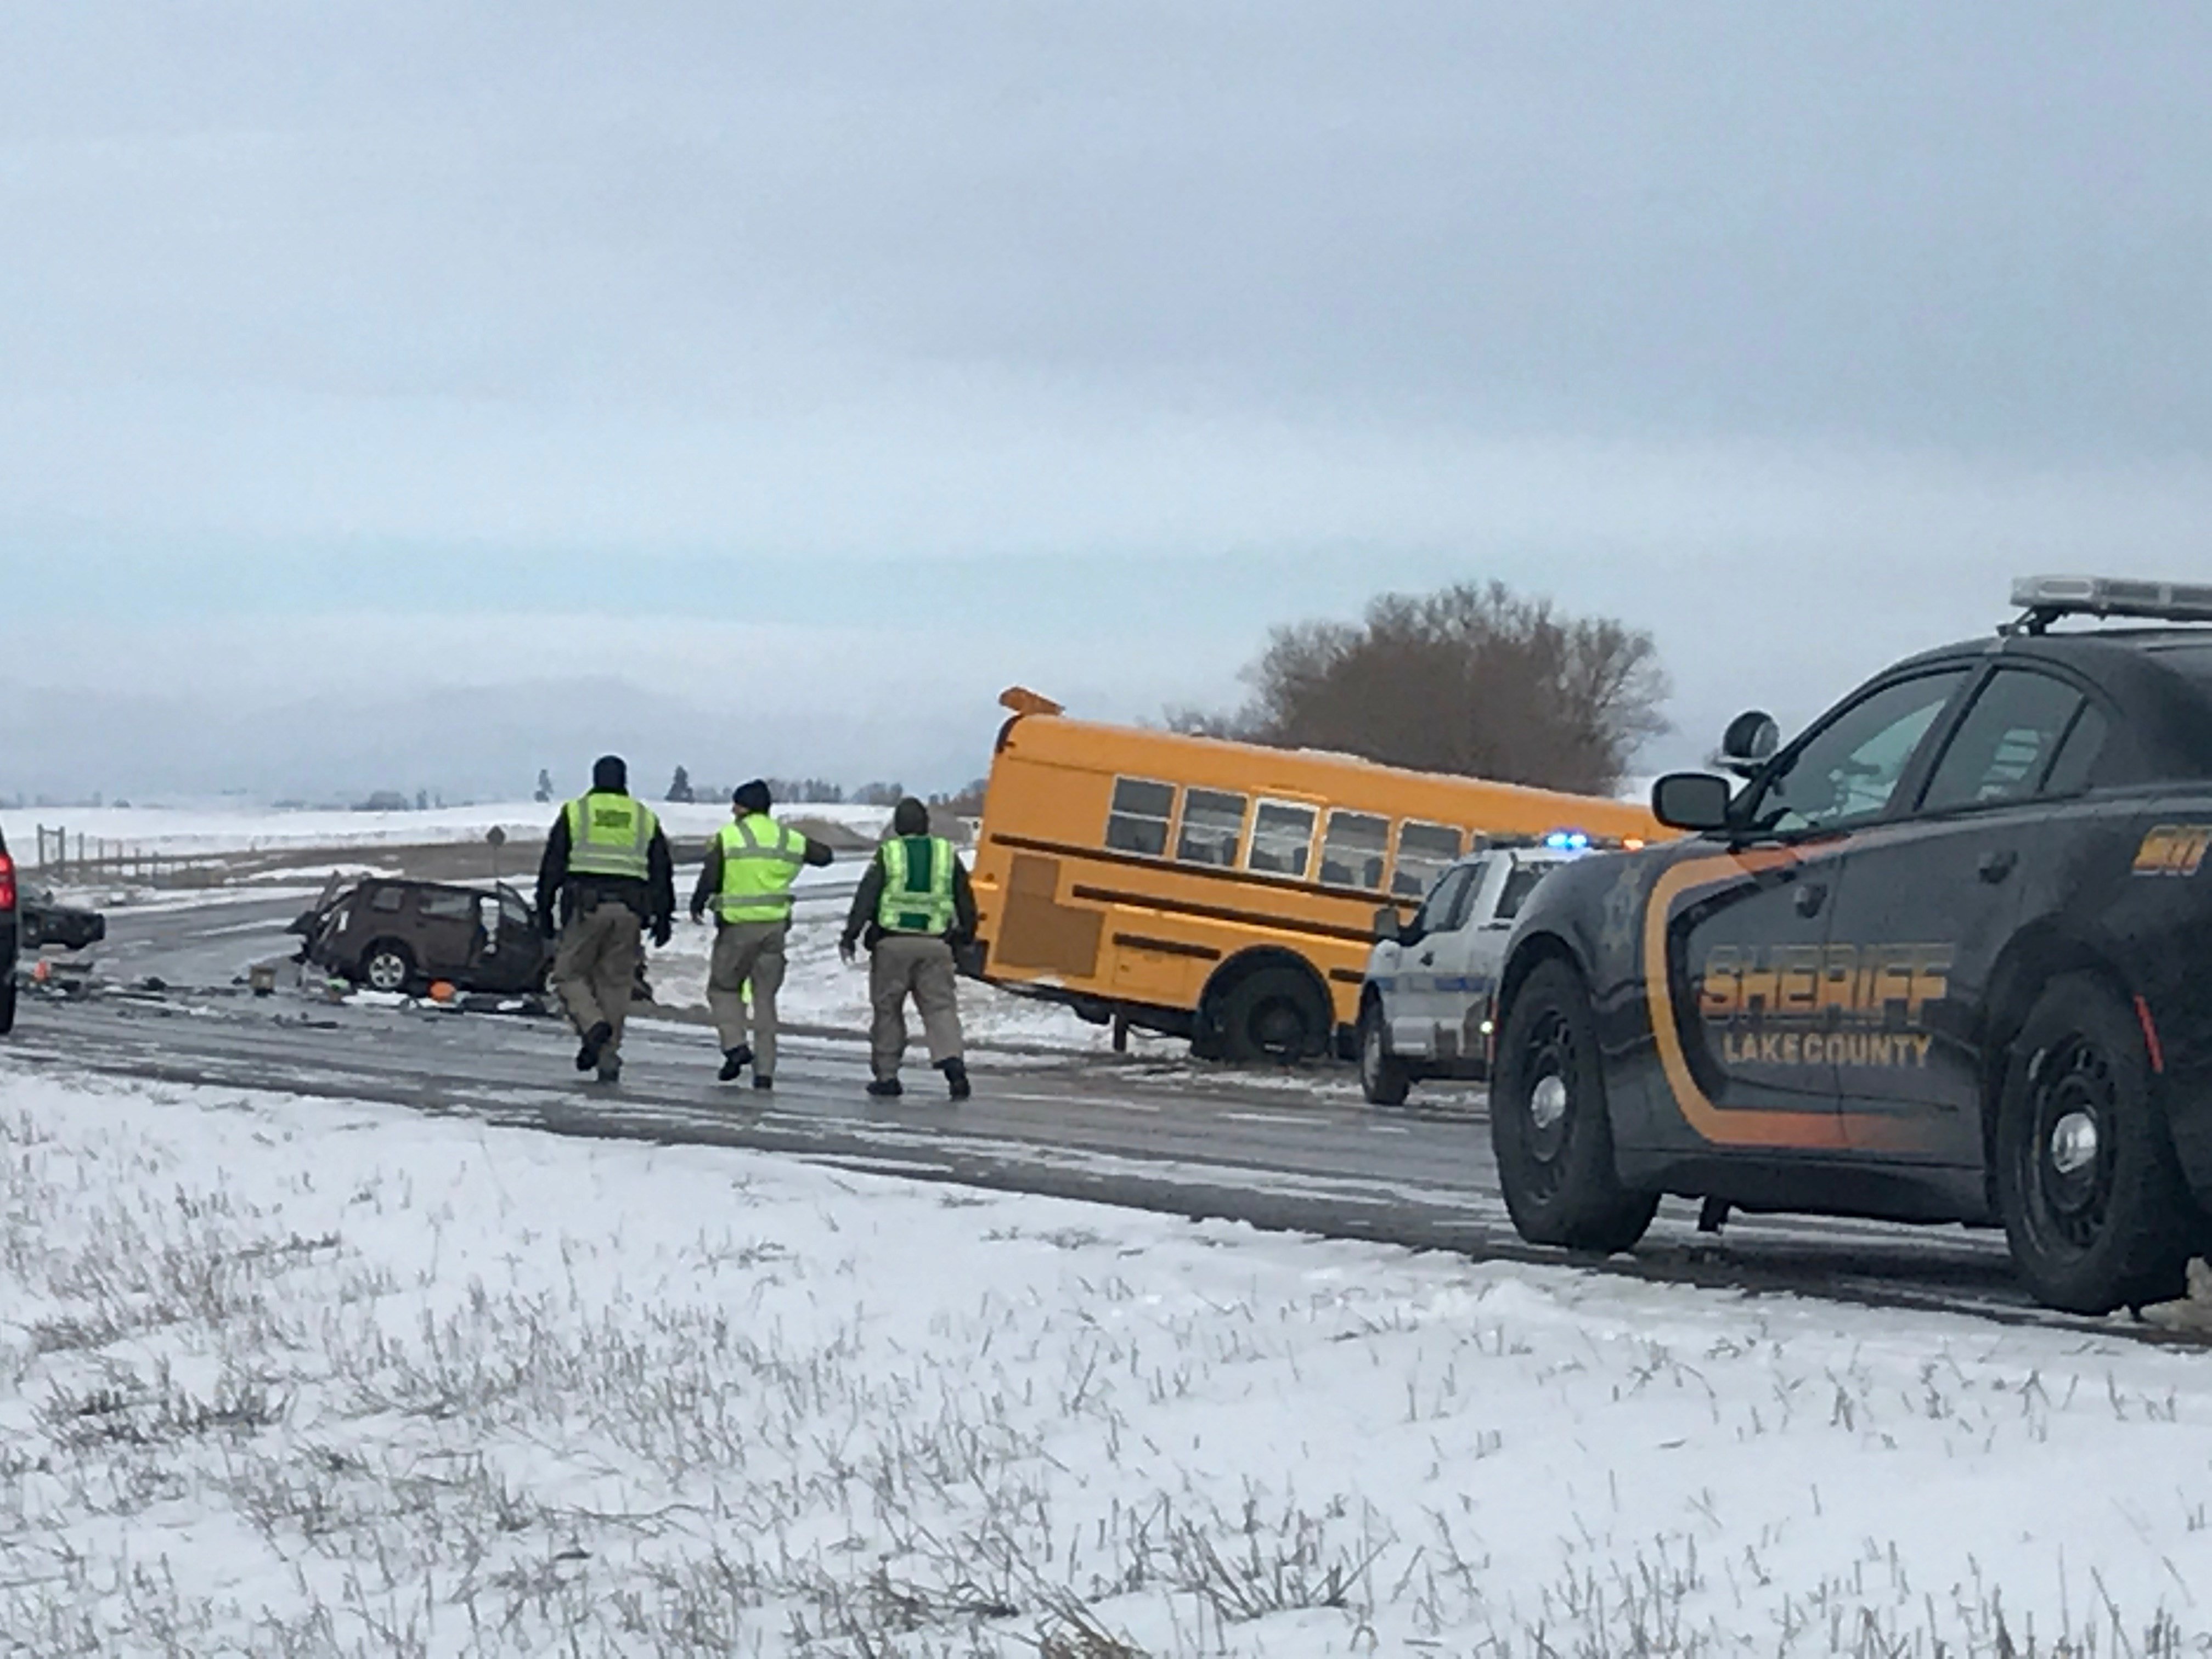 Identity Of Kalispell Woman Released In Fatal Bus Suv Crash Abc Fox Montana Local News 9199